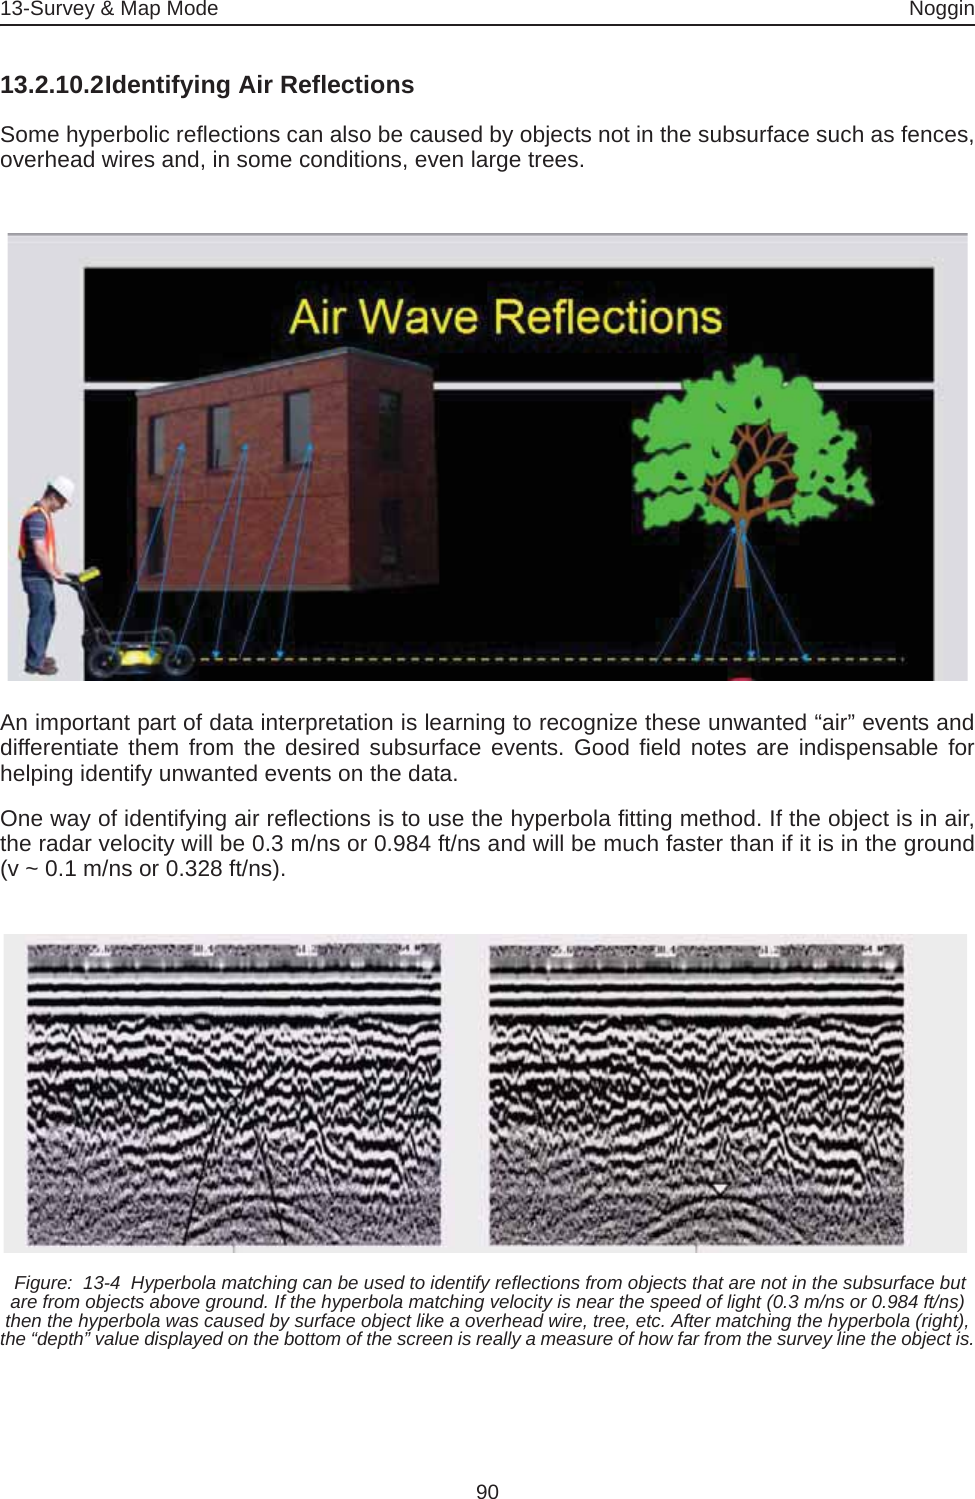 13-Survey &amp; Map Mode Noggin9013.2.10.2Identifying Air ReflectionsSome hyperbolic reflections can also be caused by objects not in the subsurface such as fences,overhead wires and, in some conditions, even large trees.An important part of data interpretation is learning to recognize these unwanted “air” events anddifferentiate them from the desired subsurface events. Good field notes are indispensable forhelping identify unwanted events on the data.One way of identifying air reflections is to use the hyperbola fitting method. If the object is in air,the radar velocity will be 0.3 m/ns or 0.984 ft/ns and will be much faster than if it is in the ground(v ~ 0.1 m/ns or 0.328 ft/ns). Figure:  13-4  Hyperbola matching can be used to identify reflections from objects that are not in the subsurface but are from objects above ground. If the hyperbola matching velocity is near the speed of light (0.3 m/ns or 0.984 ft/ns) then the hyperbola was caused by surface object like a overhead wire, tree, etc. After matching the hyperbola (right), the “depth” value displayed on the bottom of the screen is really a measure of how far from the survey line the object is.